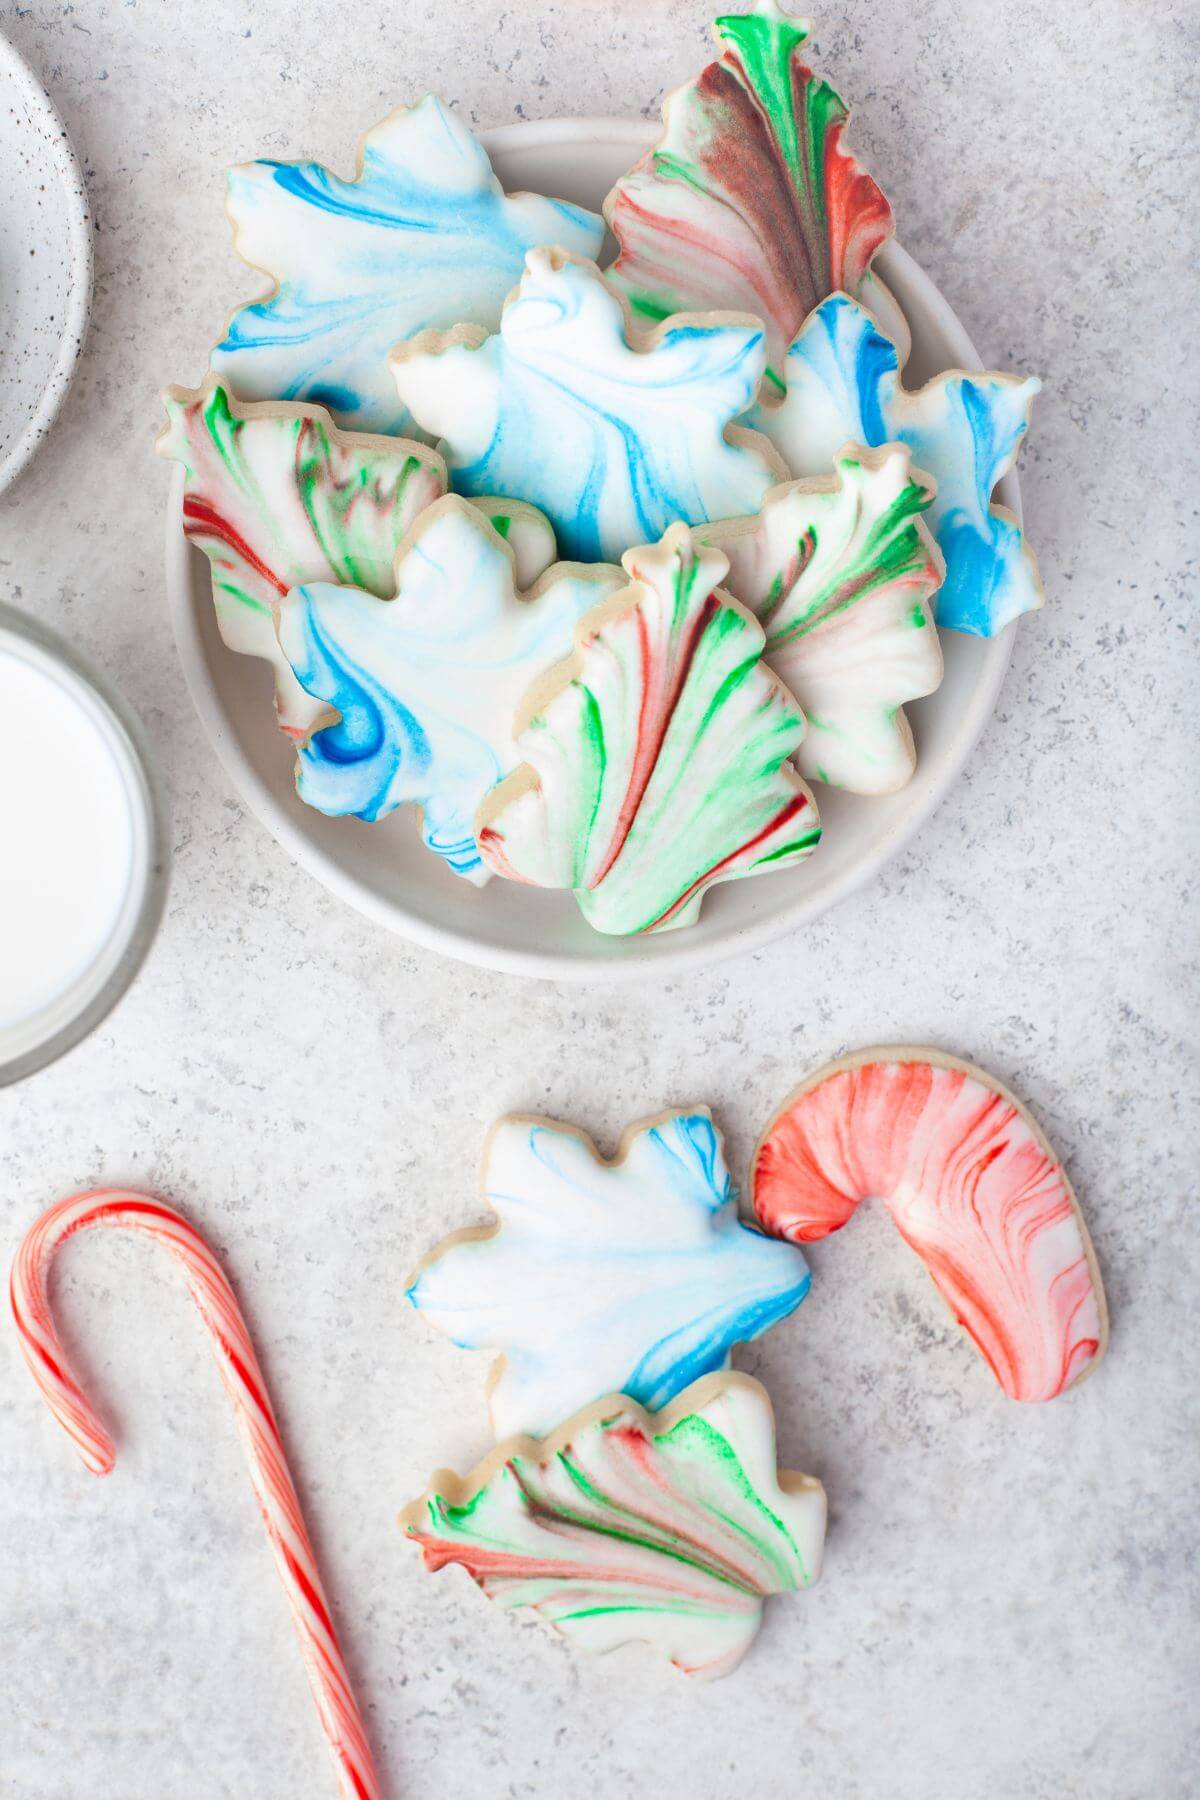 Marbled Cookies fill up a platter.